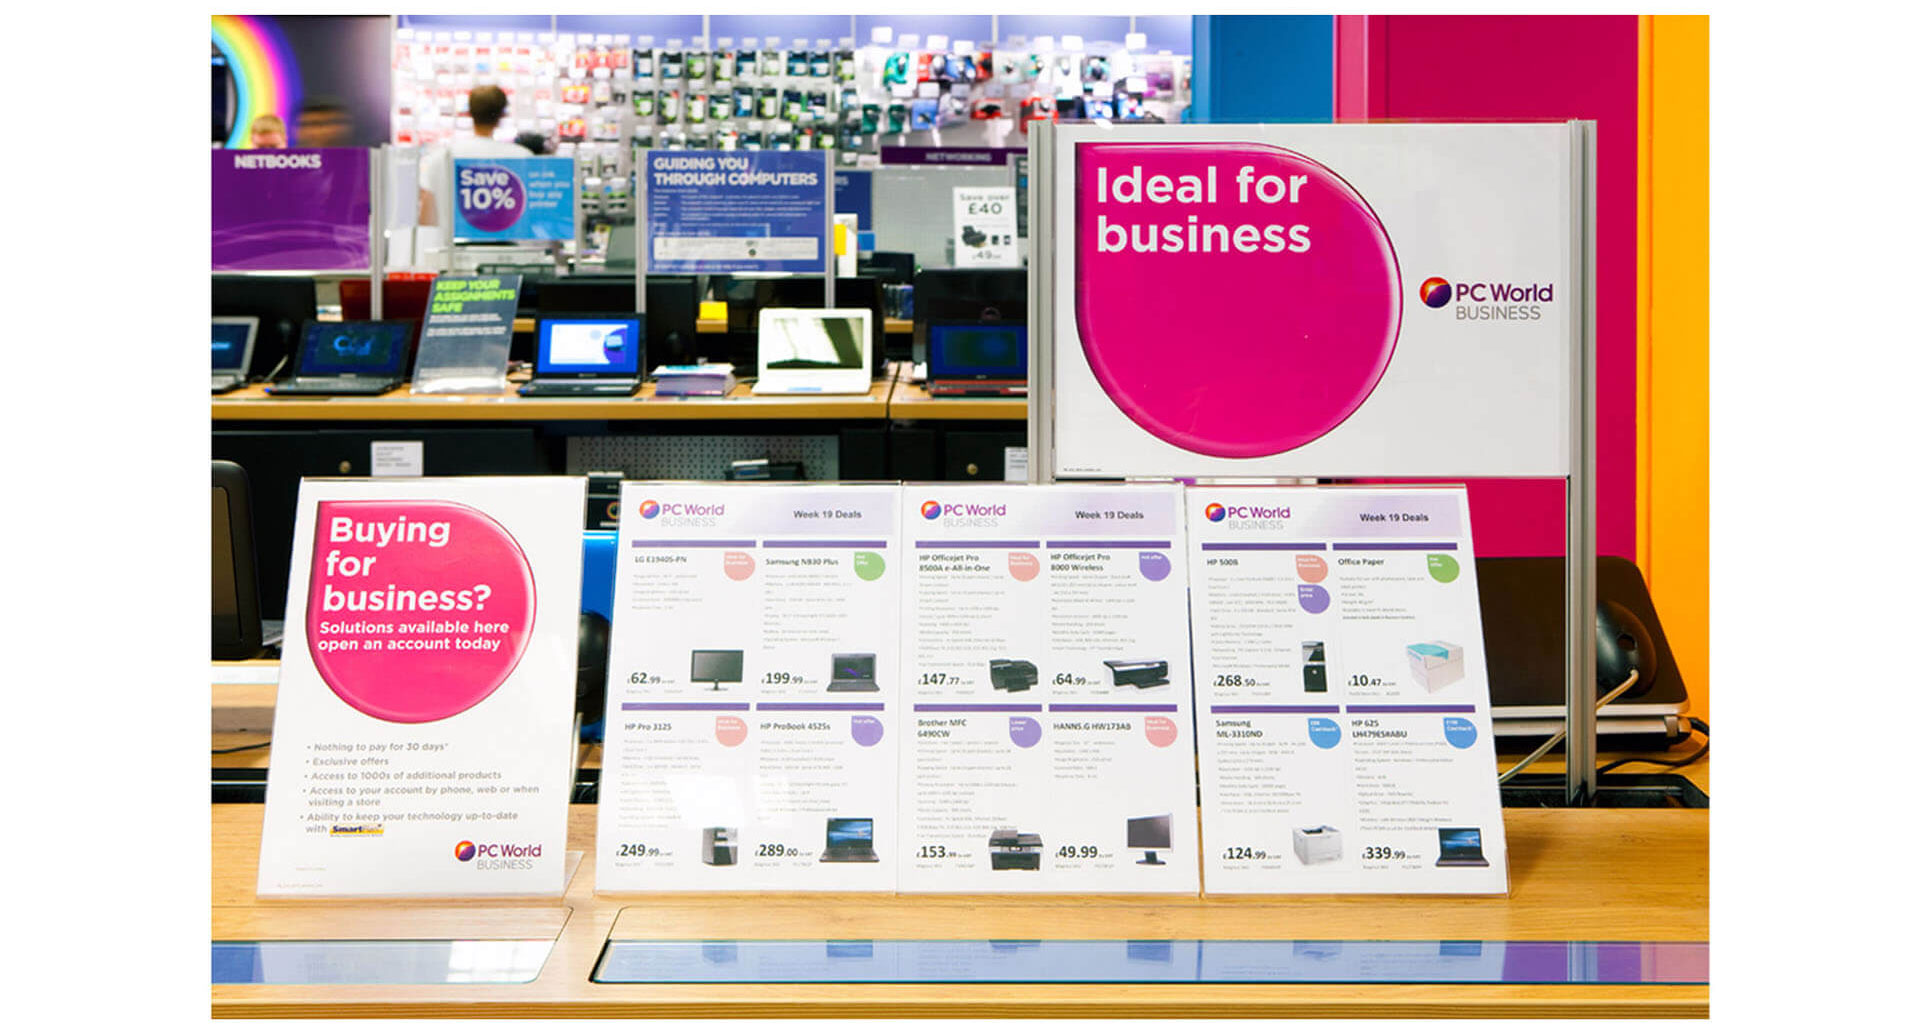 Currys PC World corporate sub-brand identity PC World Business in-store brand communications